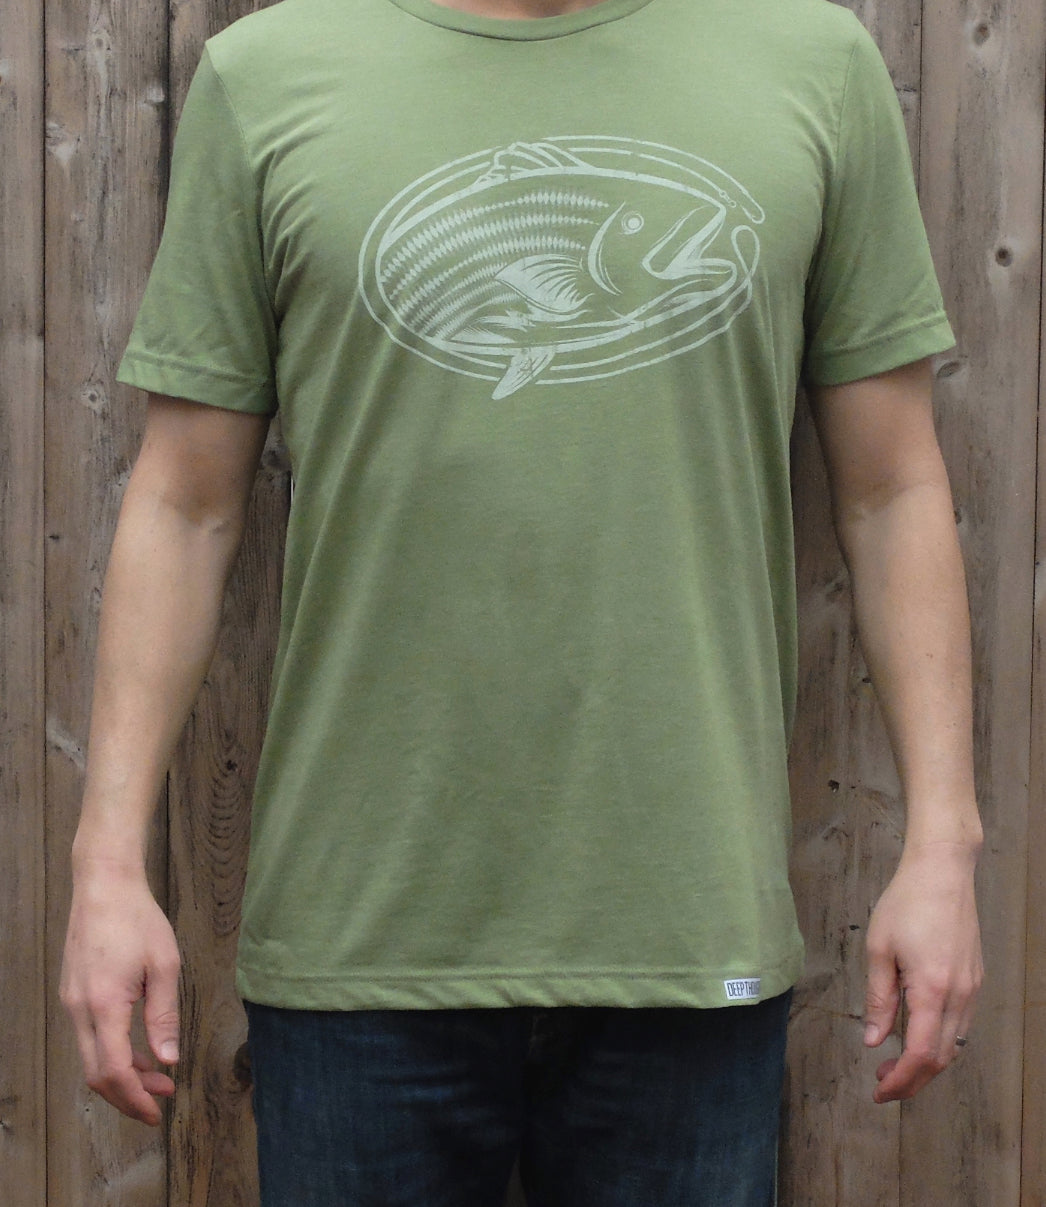 man wearing light heather green soft cotton blend tee with white vintage style oval-shaped striped bass fishing graphic